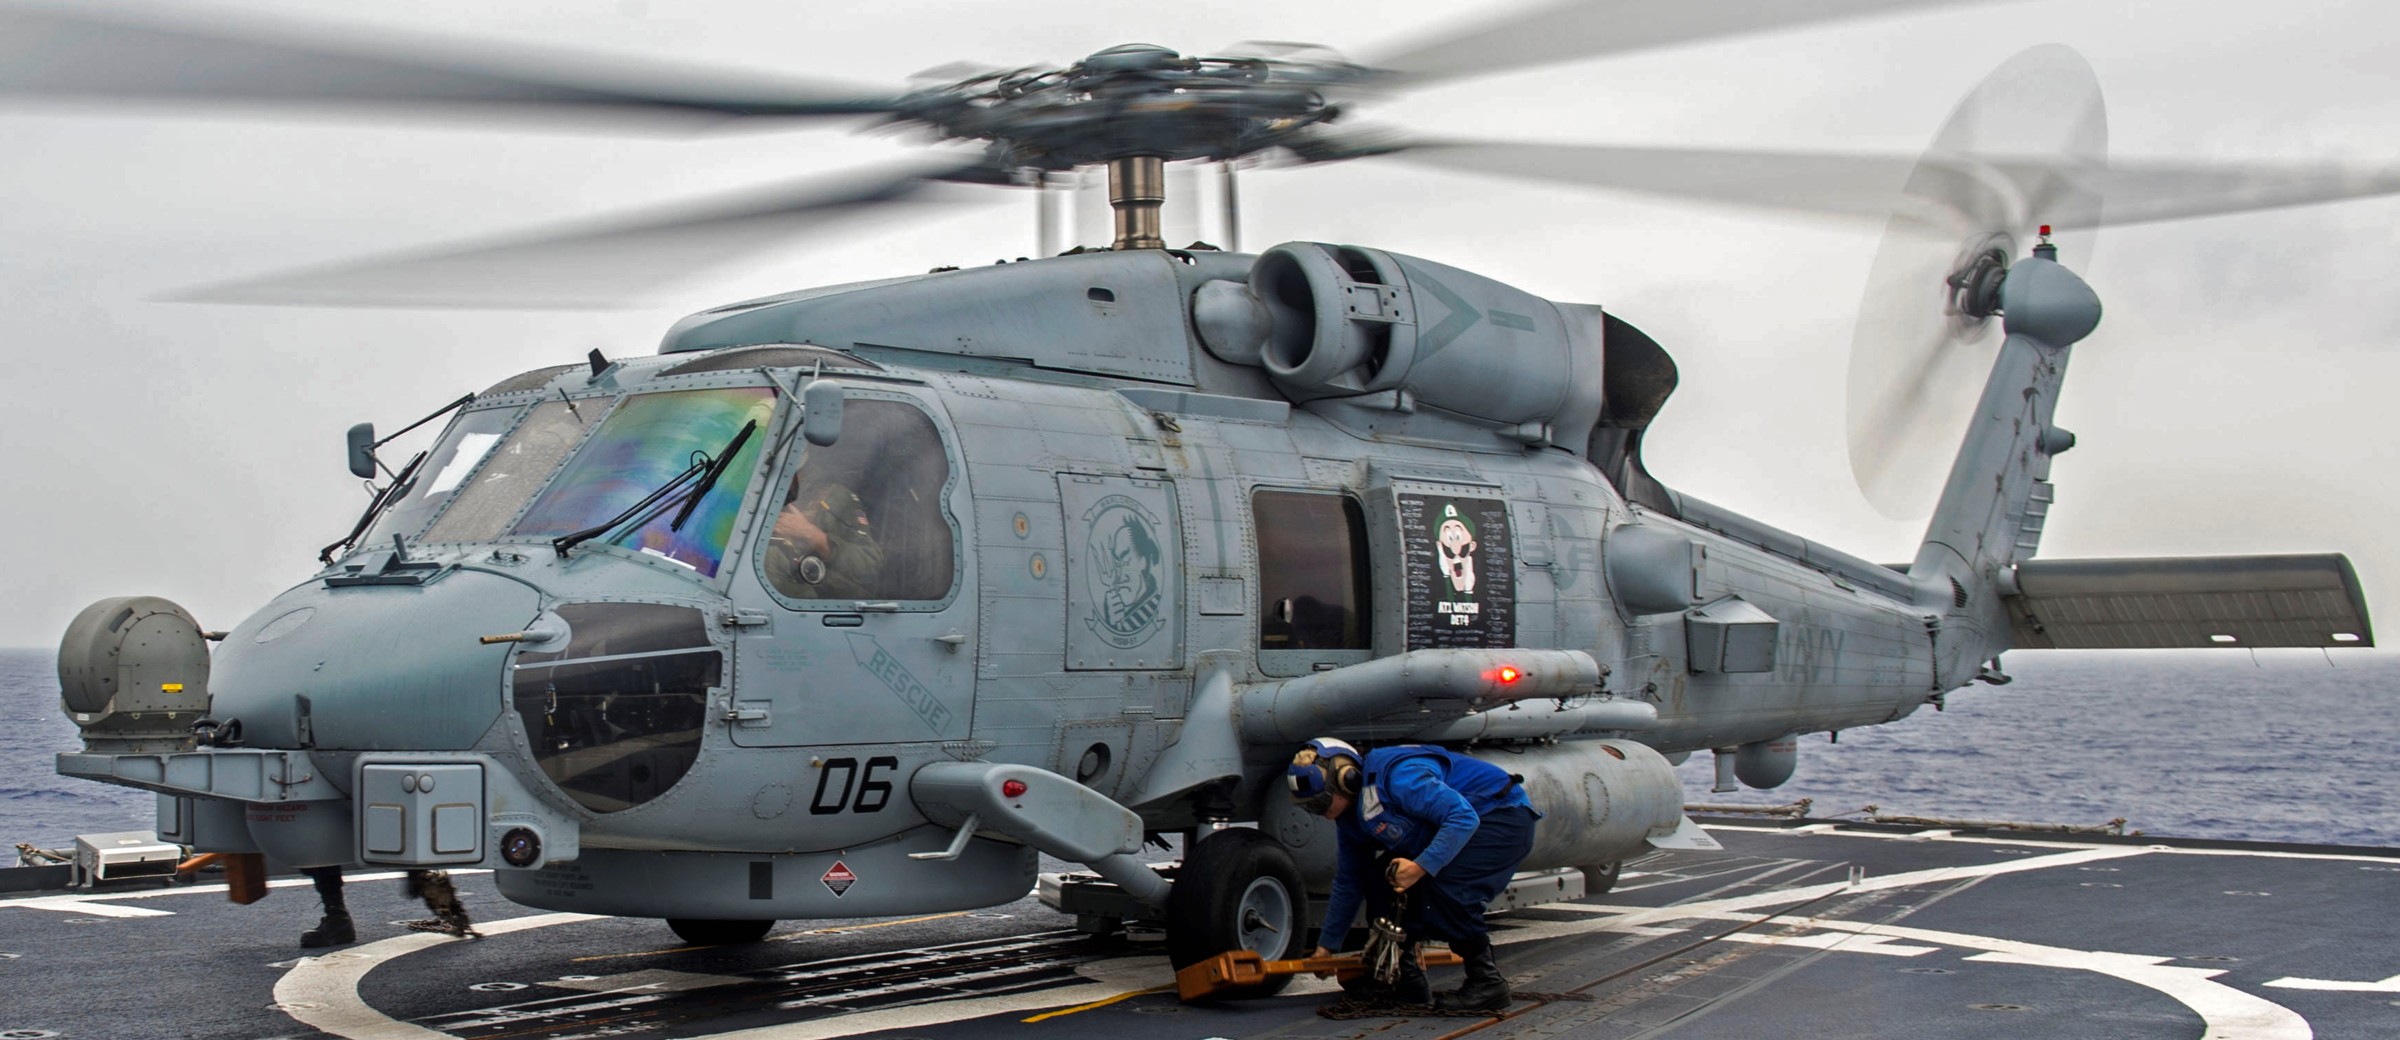 hsm-51 warlords helicopter maritime strike squadron mh-60r seahawk navy 2014 19